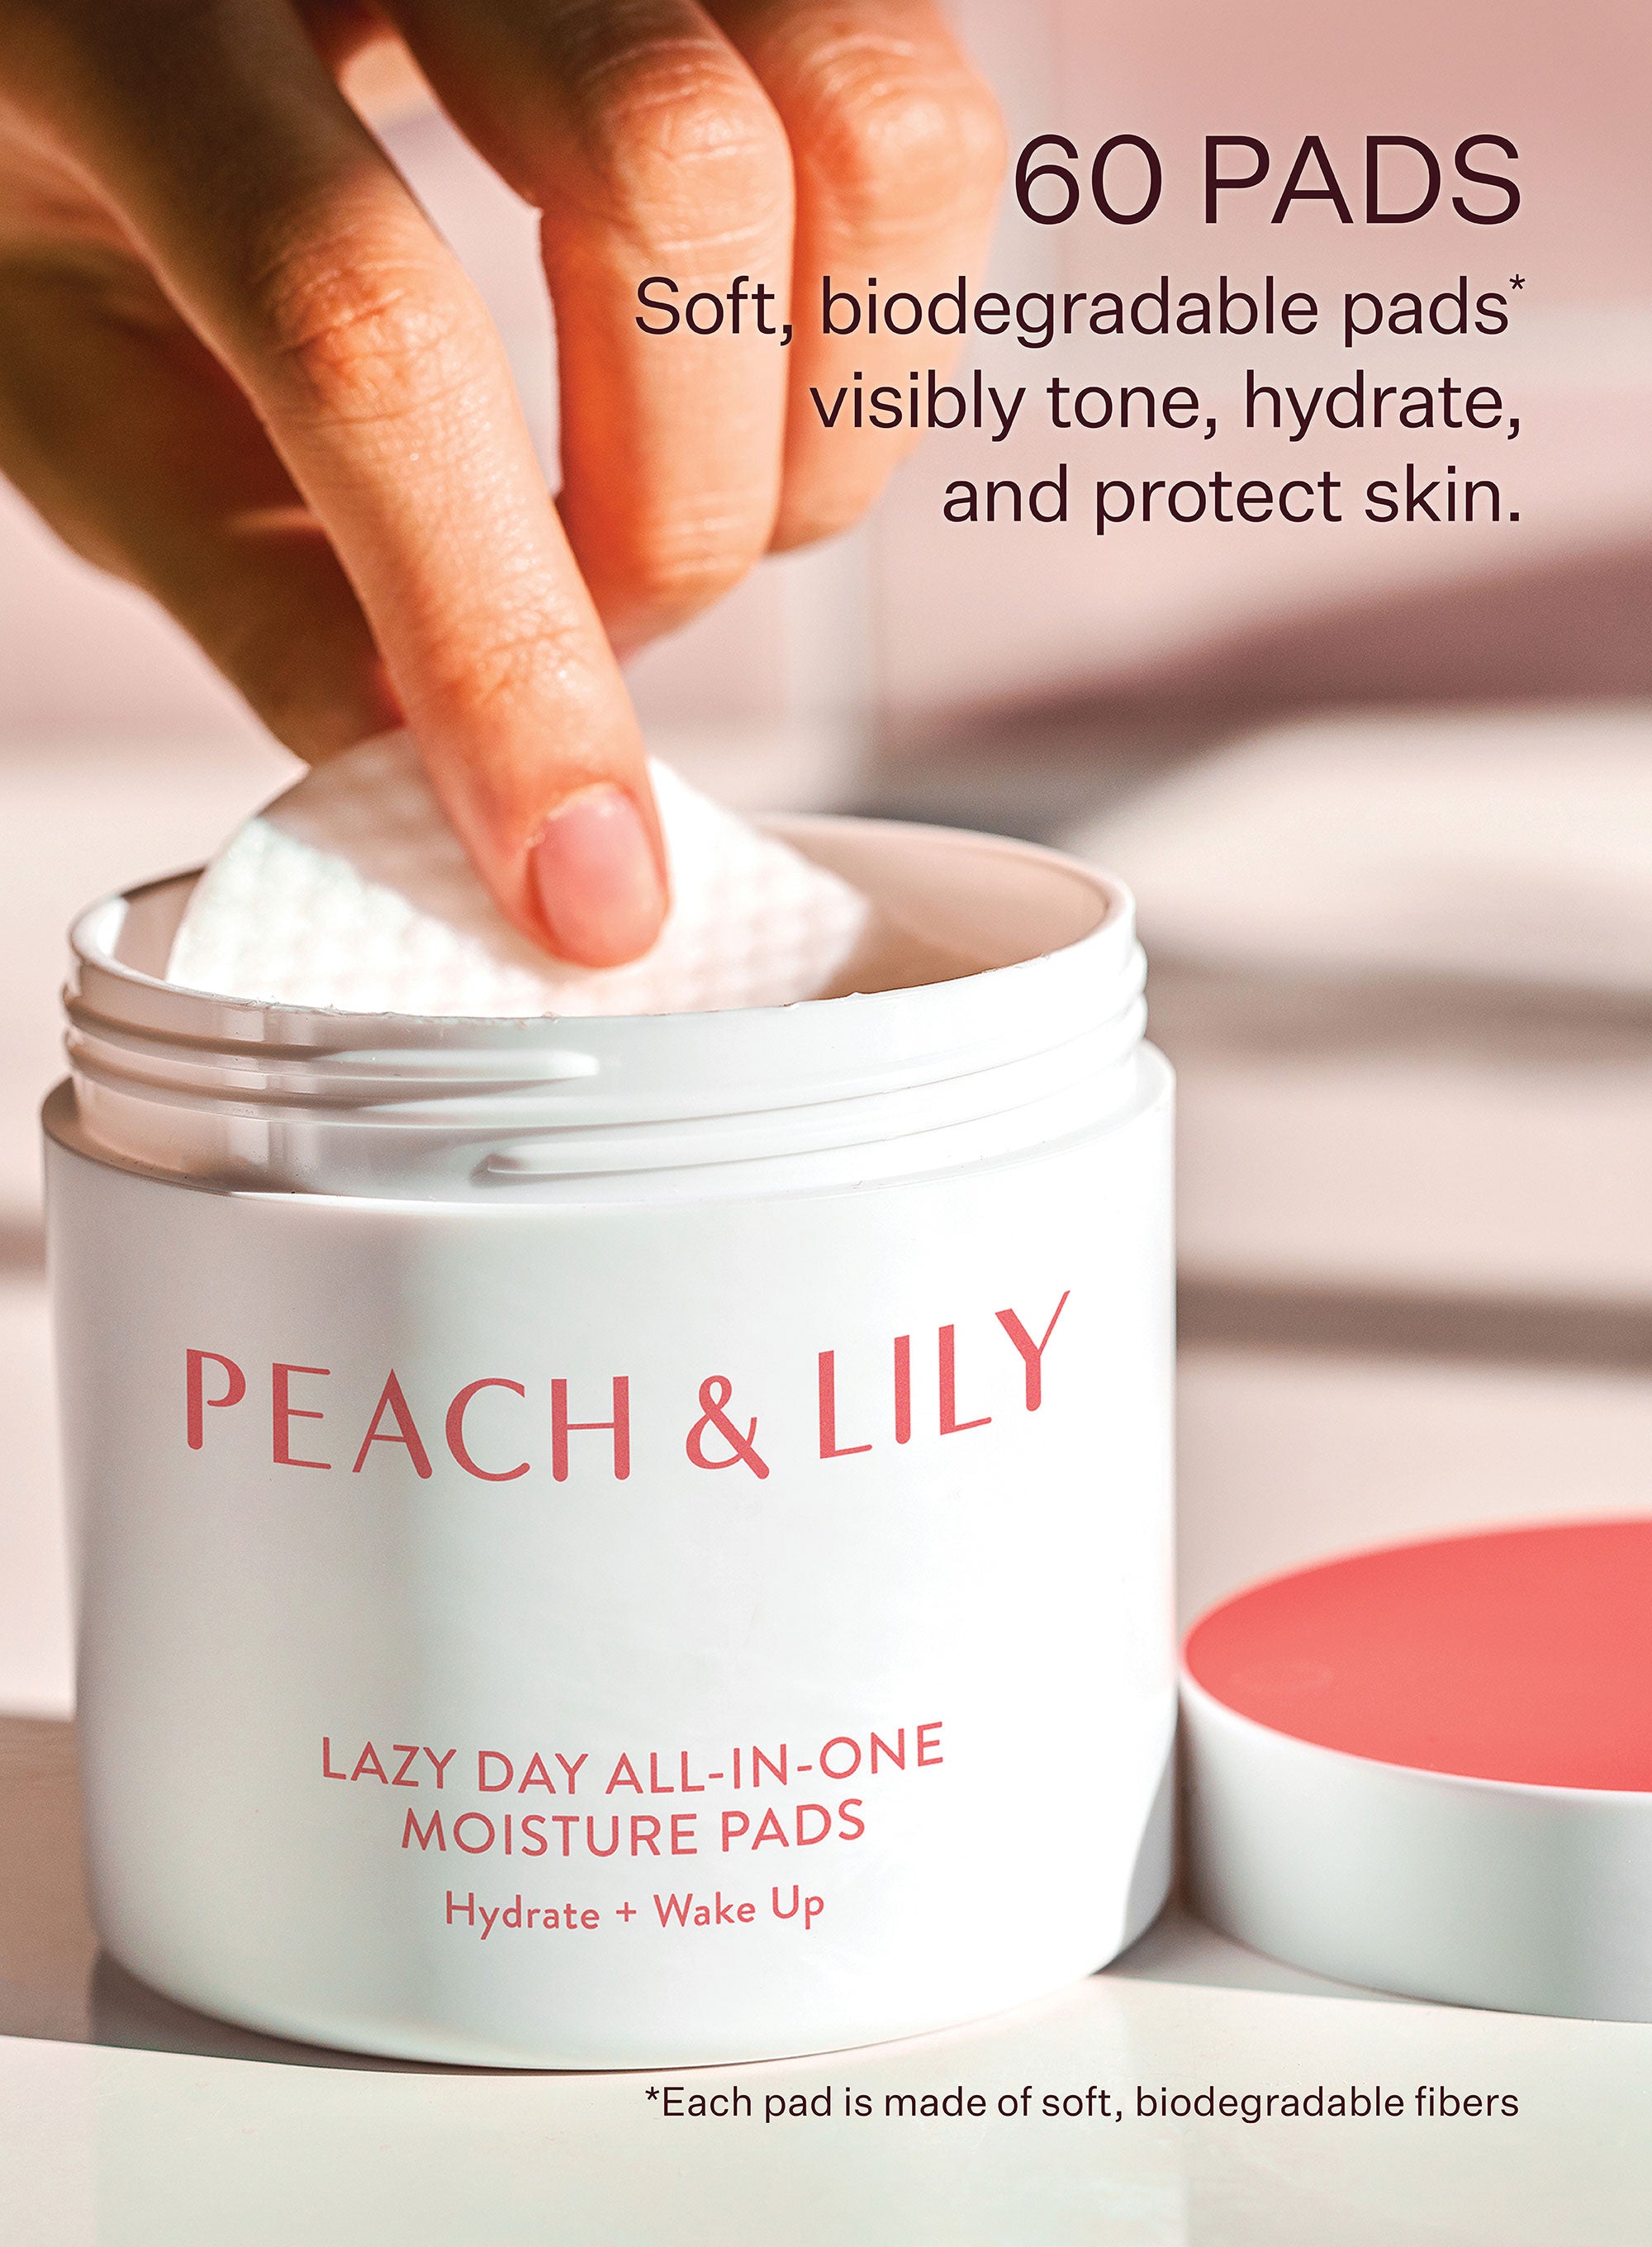 Peach & Lily Lazy Day's All-In-One Moisture Pads Review - Musings of a Muse